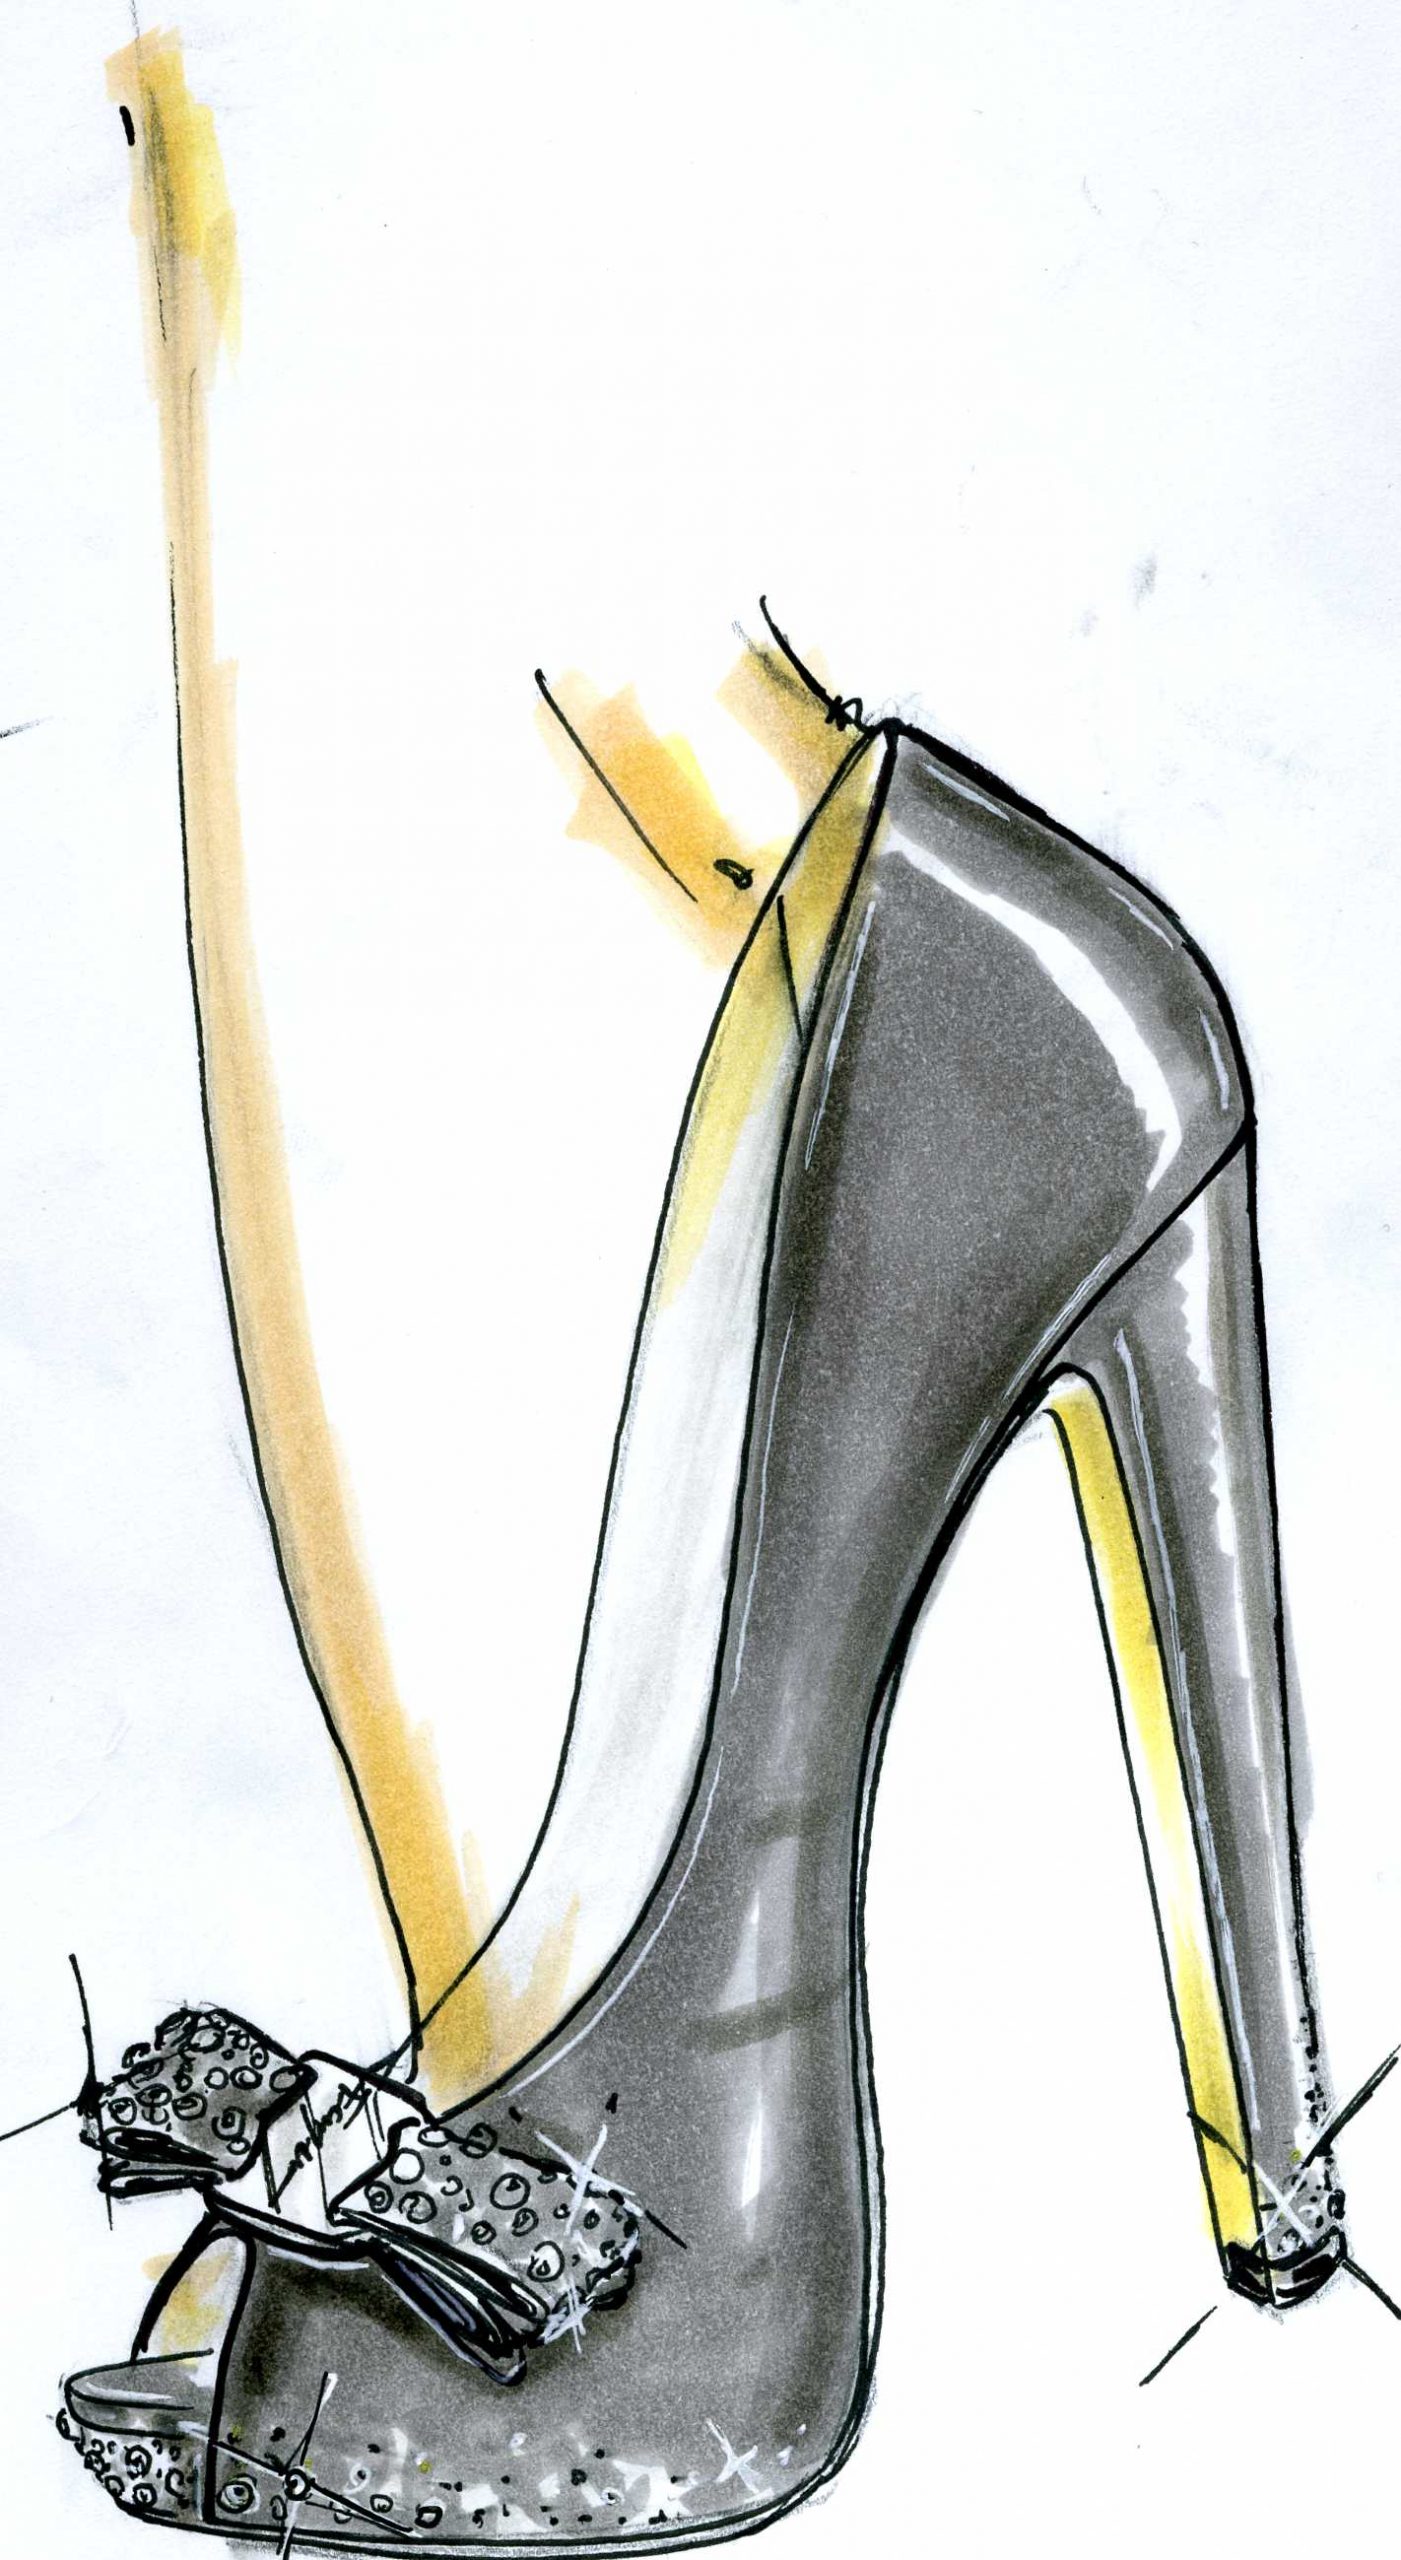 Sketch of Sonam Kapoor's made-to-order Ferragamo pumps as part of "Shoes for a Star" project (Photo courtesy | Salvatore Ferragamo)